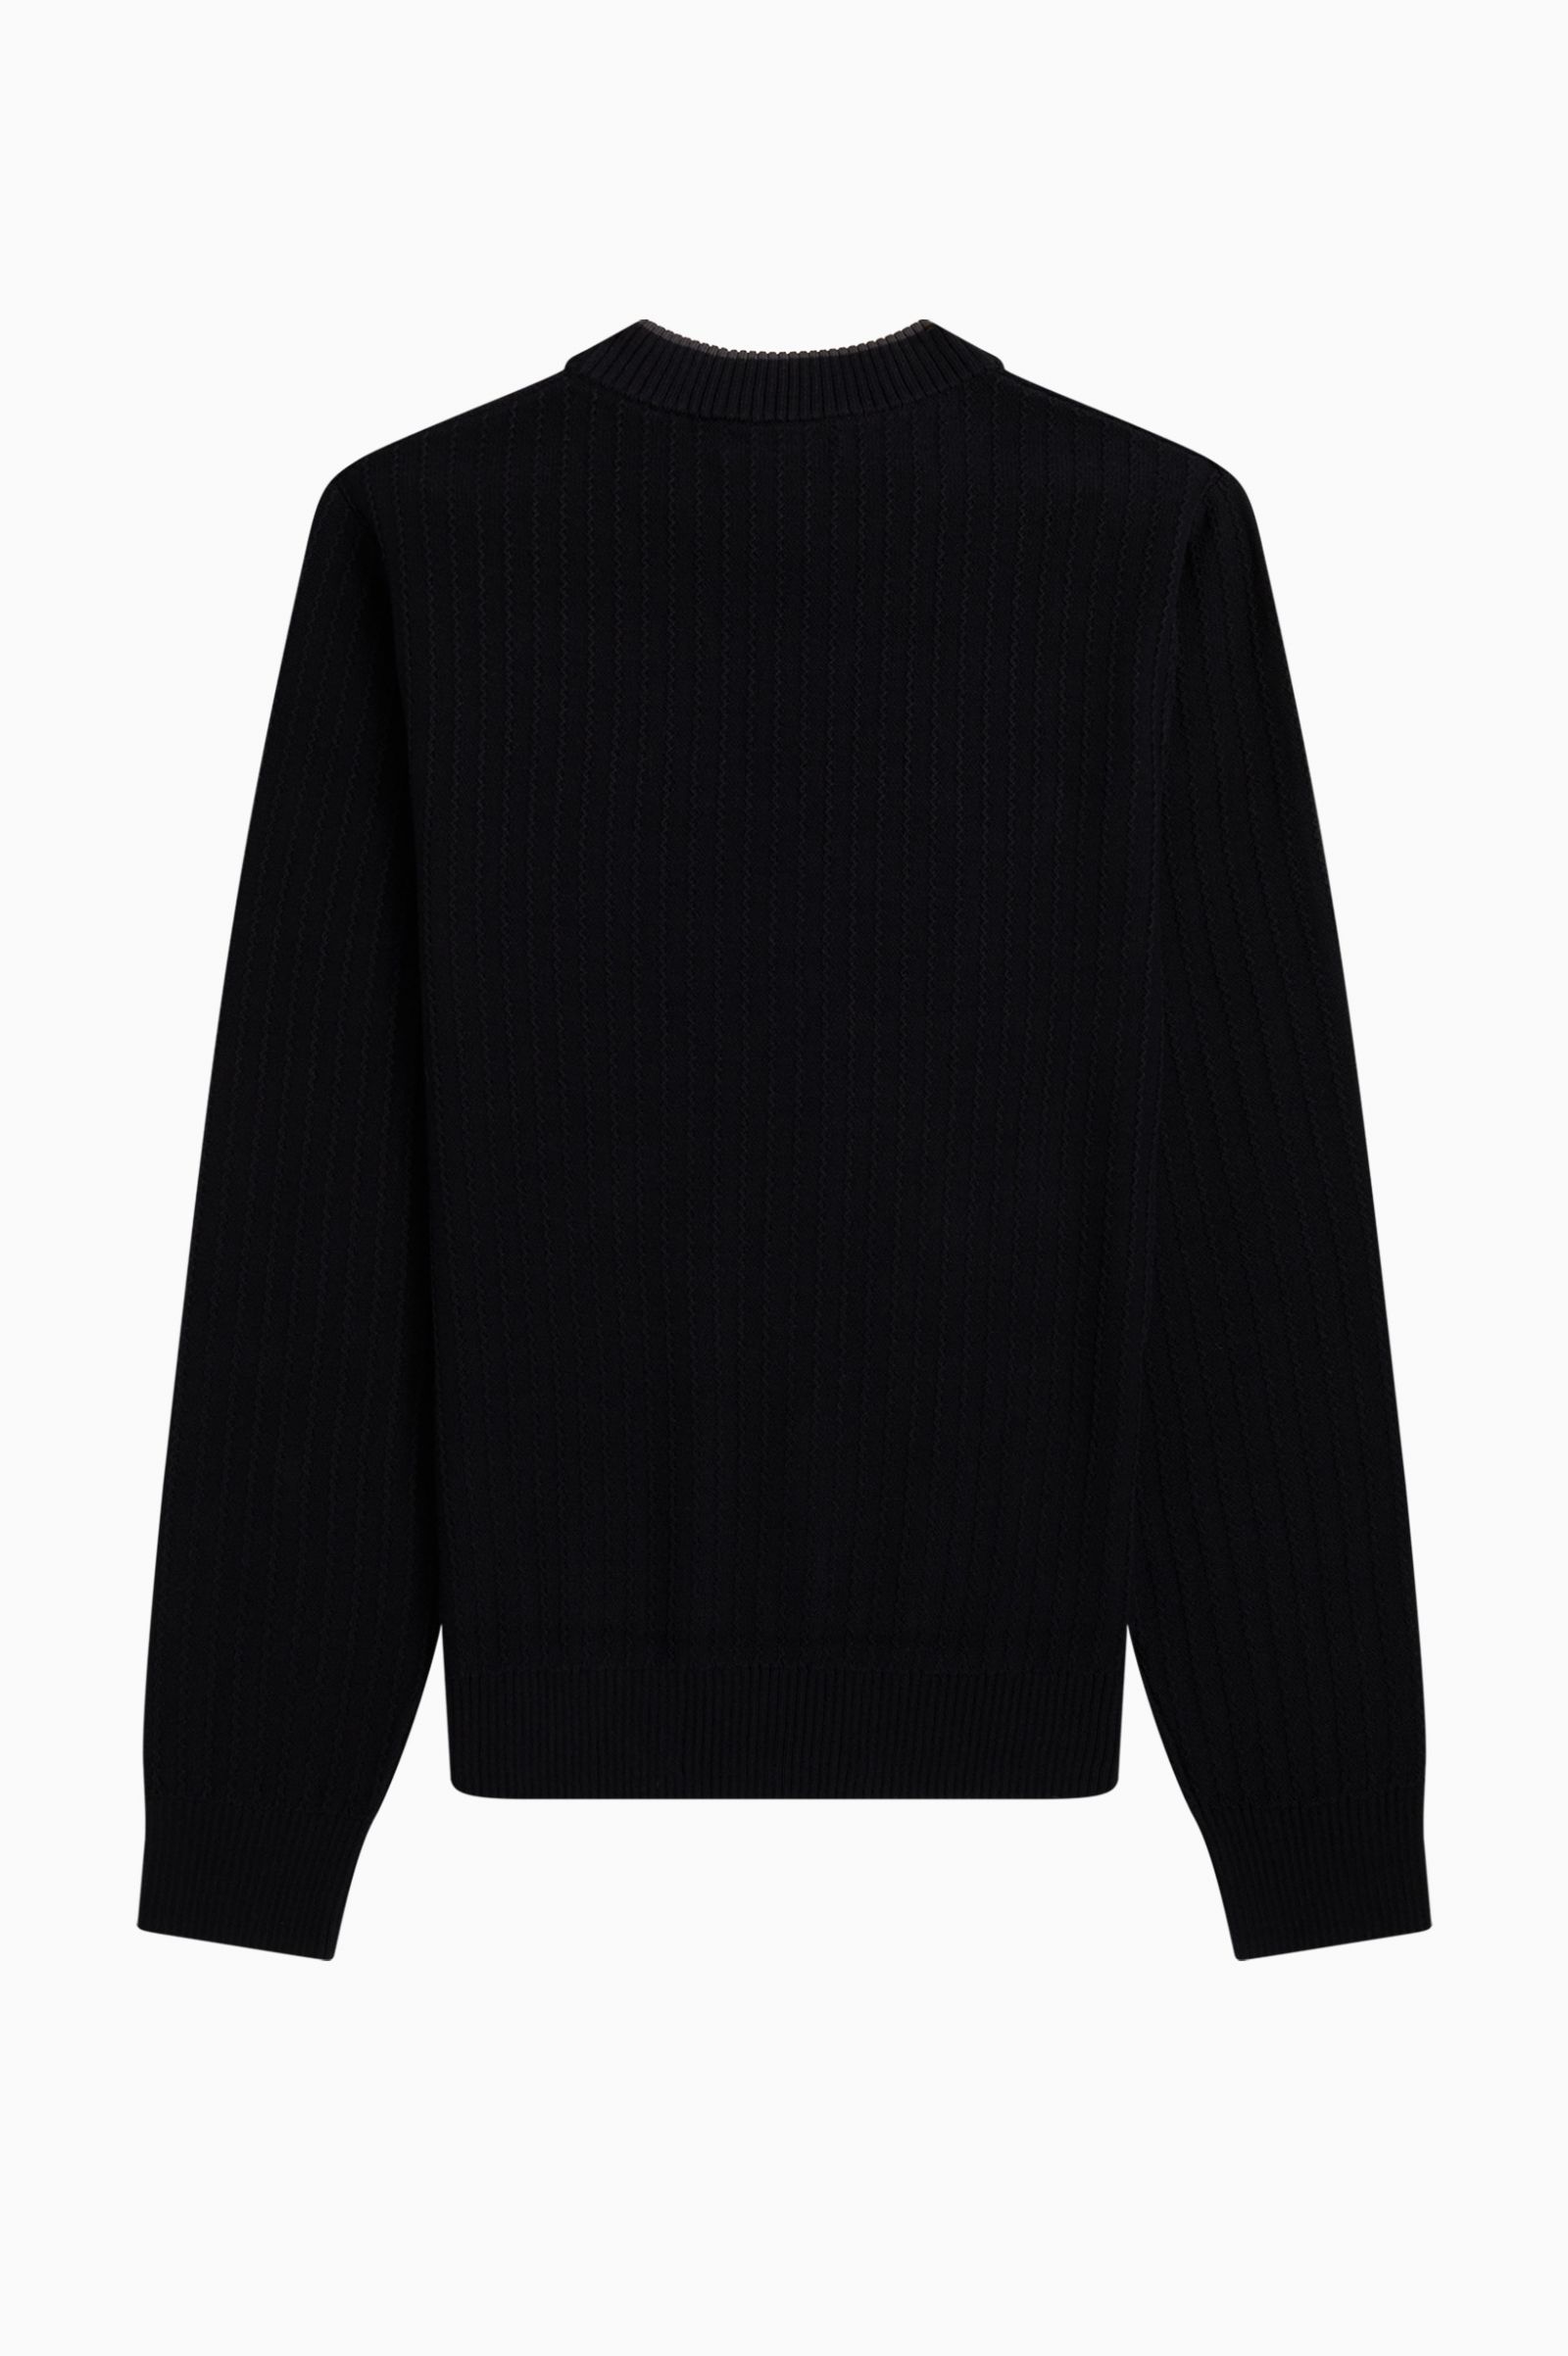 Fred perry Crew Neck Jumper Black